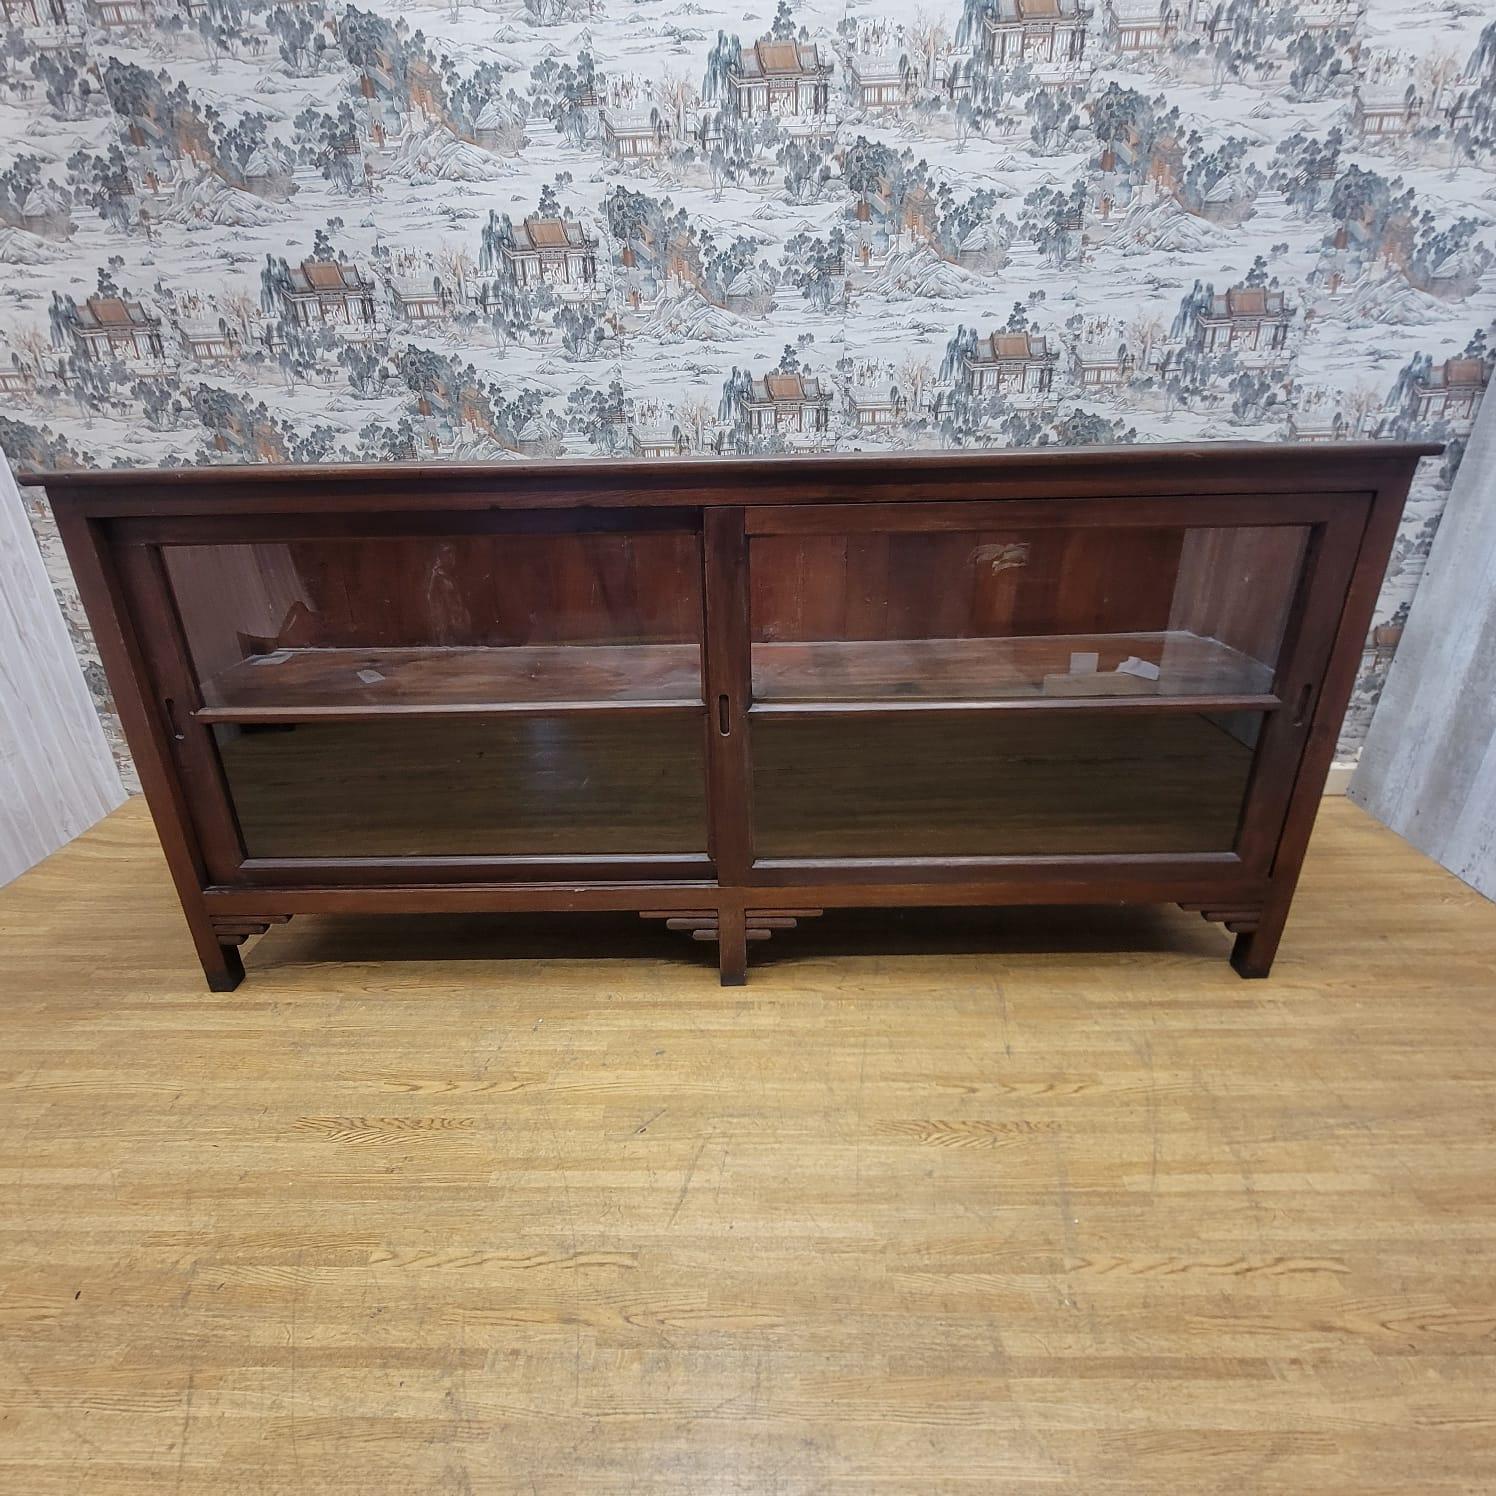 Vintage Teakwood Low Bookcase / Display Cabinet with Sliding Glass Doors For Sale 1